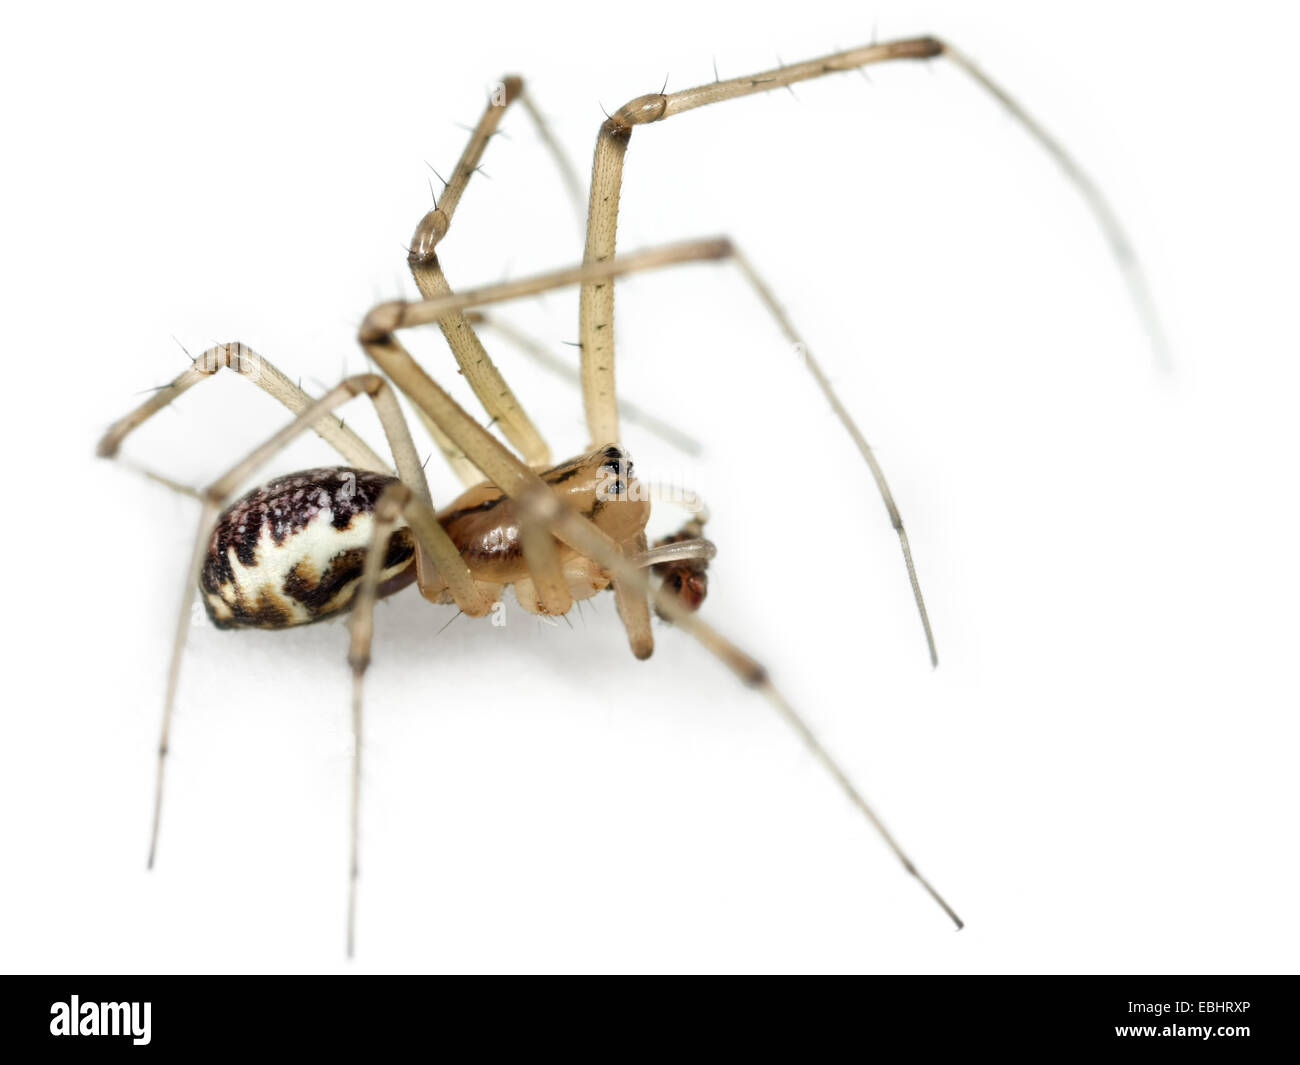 A male Common Hammock-weaver (Linyphia triangularis) spider on a white background, part of the family Linyphiidae - Sheetweb weavers. Stock Photo